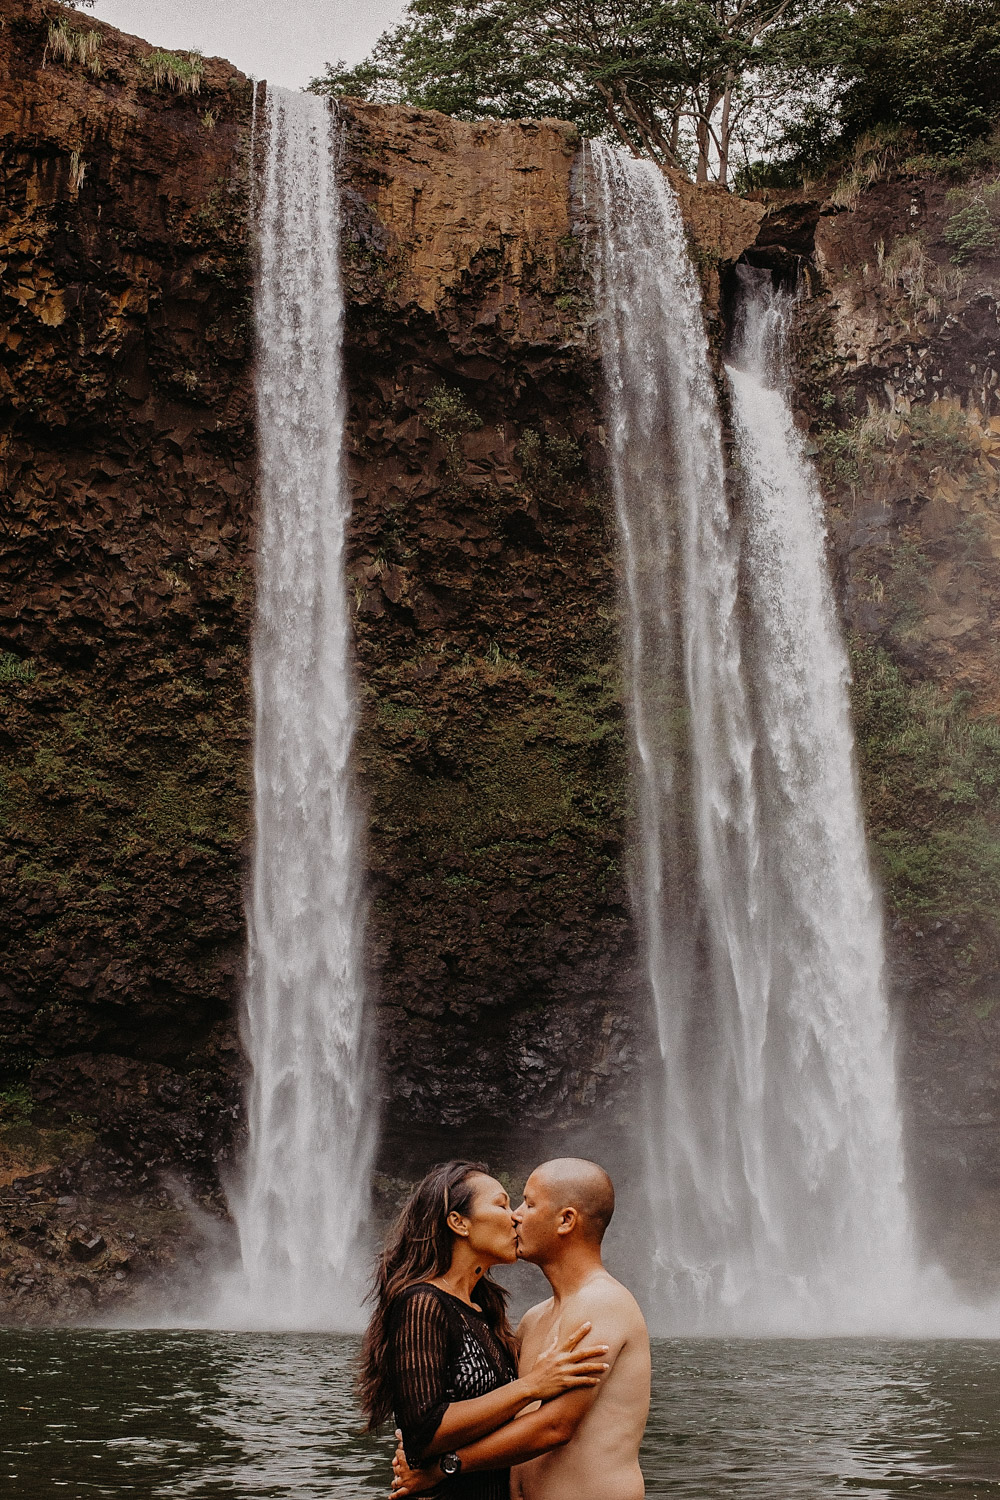 Couple kisses at the base of a large water during their couples engagement photoshoot in Hawaii by Liz Koston.